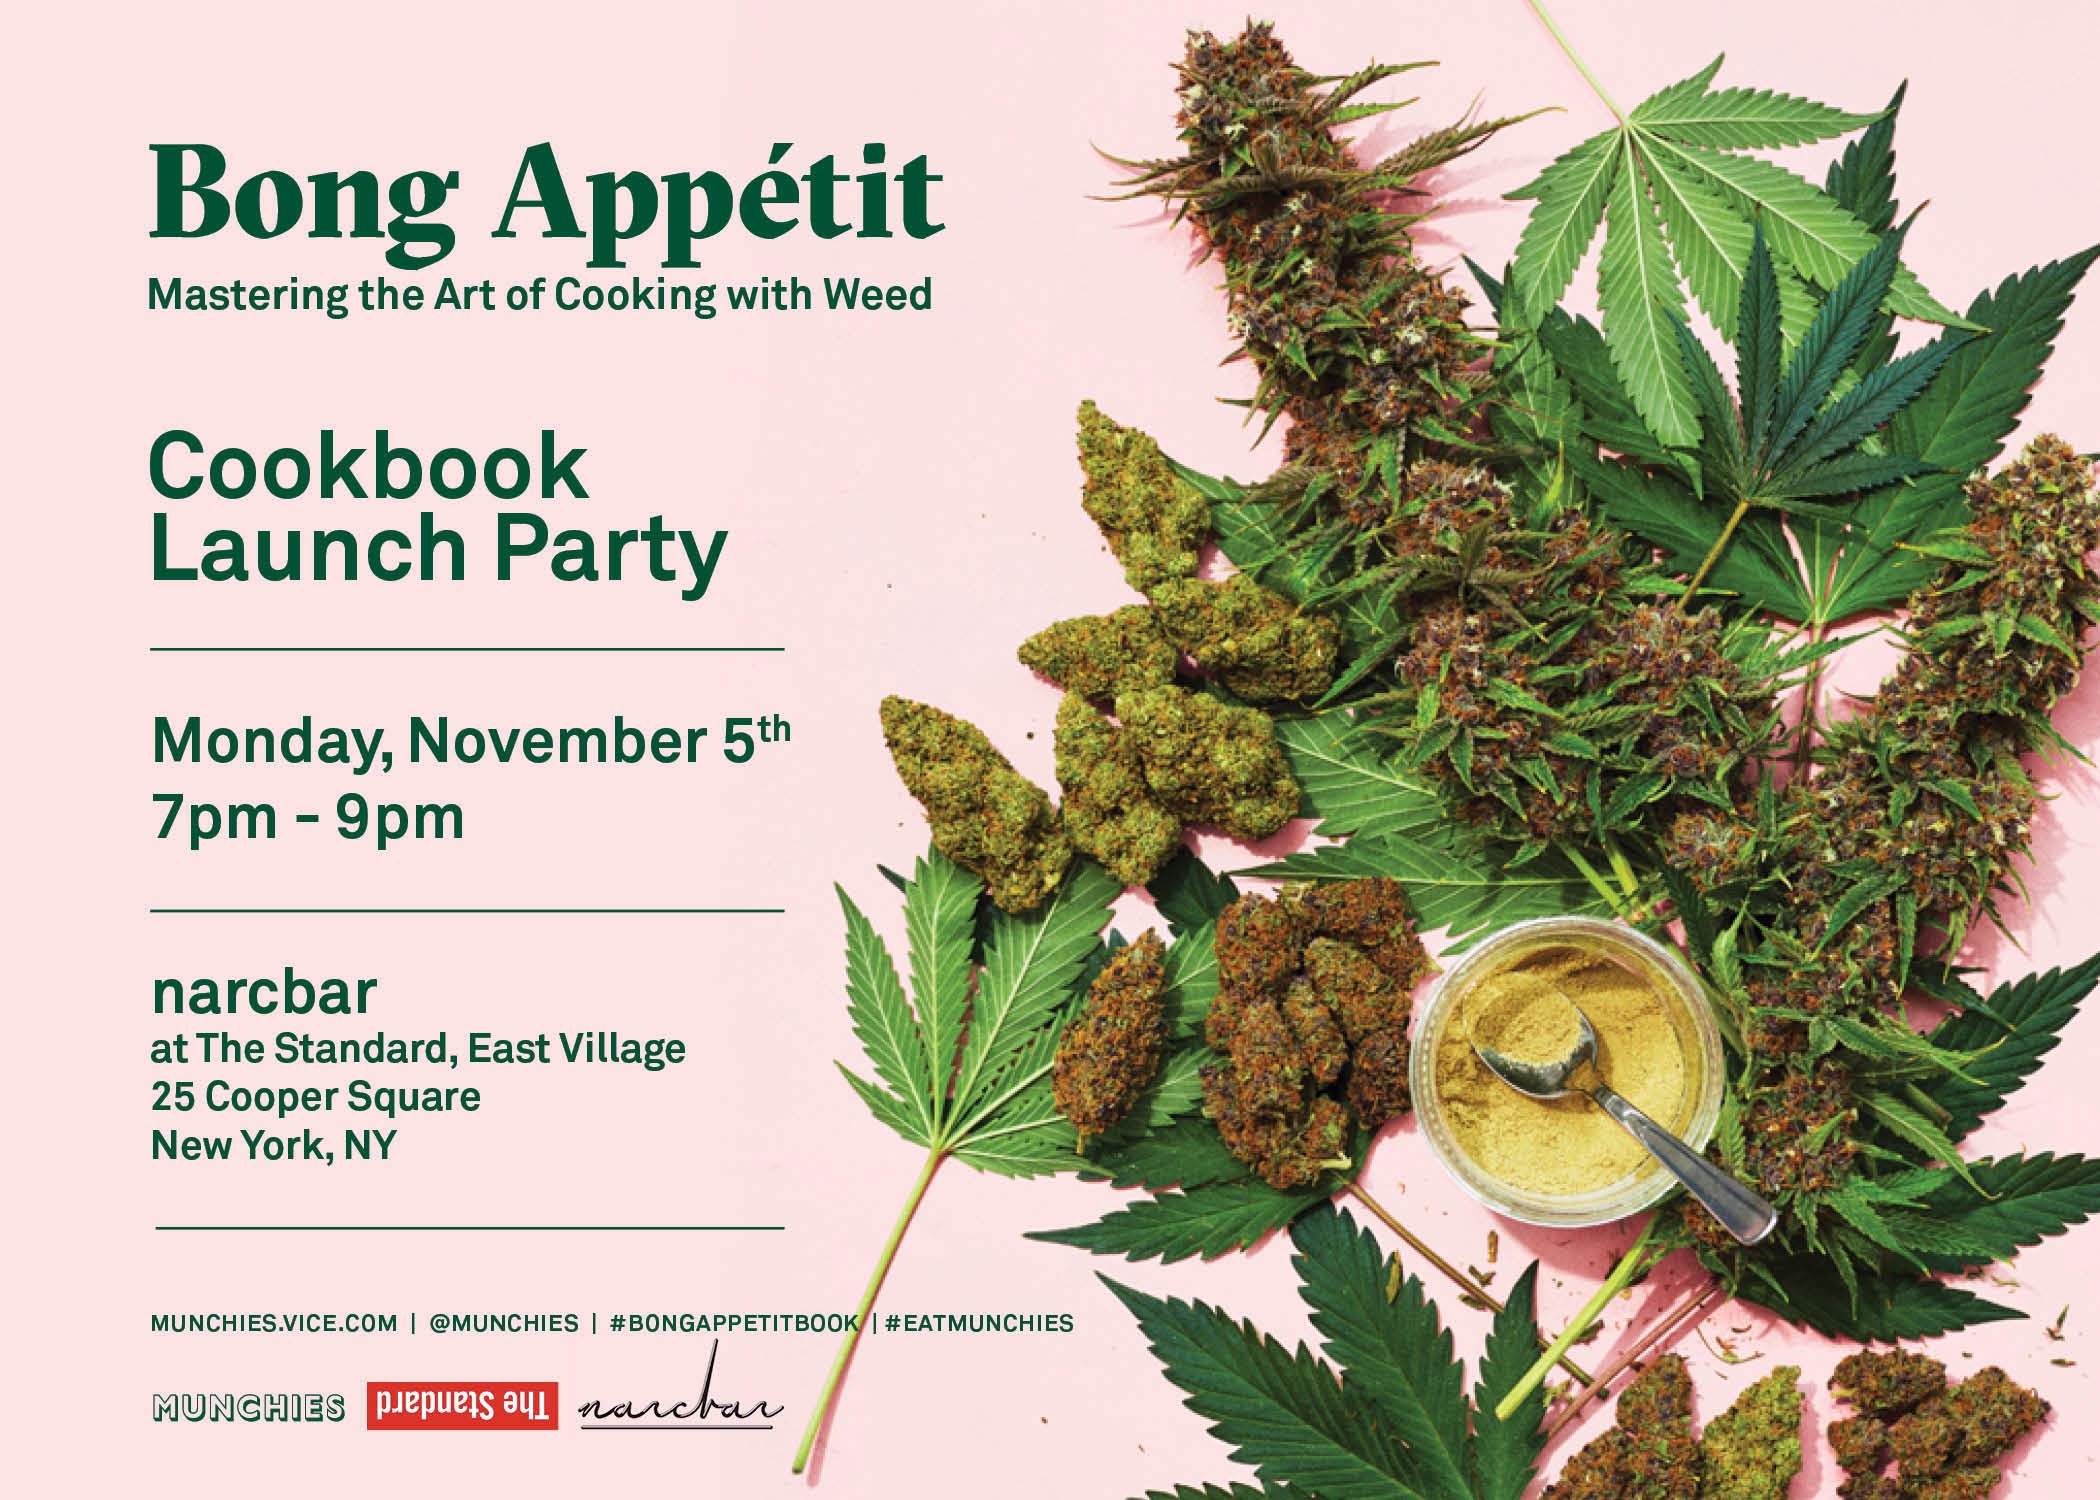 MUNCHIES on Twitter: "NYC: Join us for an evening of great food and good fun at the Bong Appétit Cookbook Launch 11/5, 7P @ narcbar, brought to you by @munchies and @